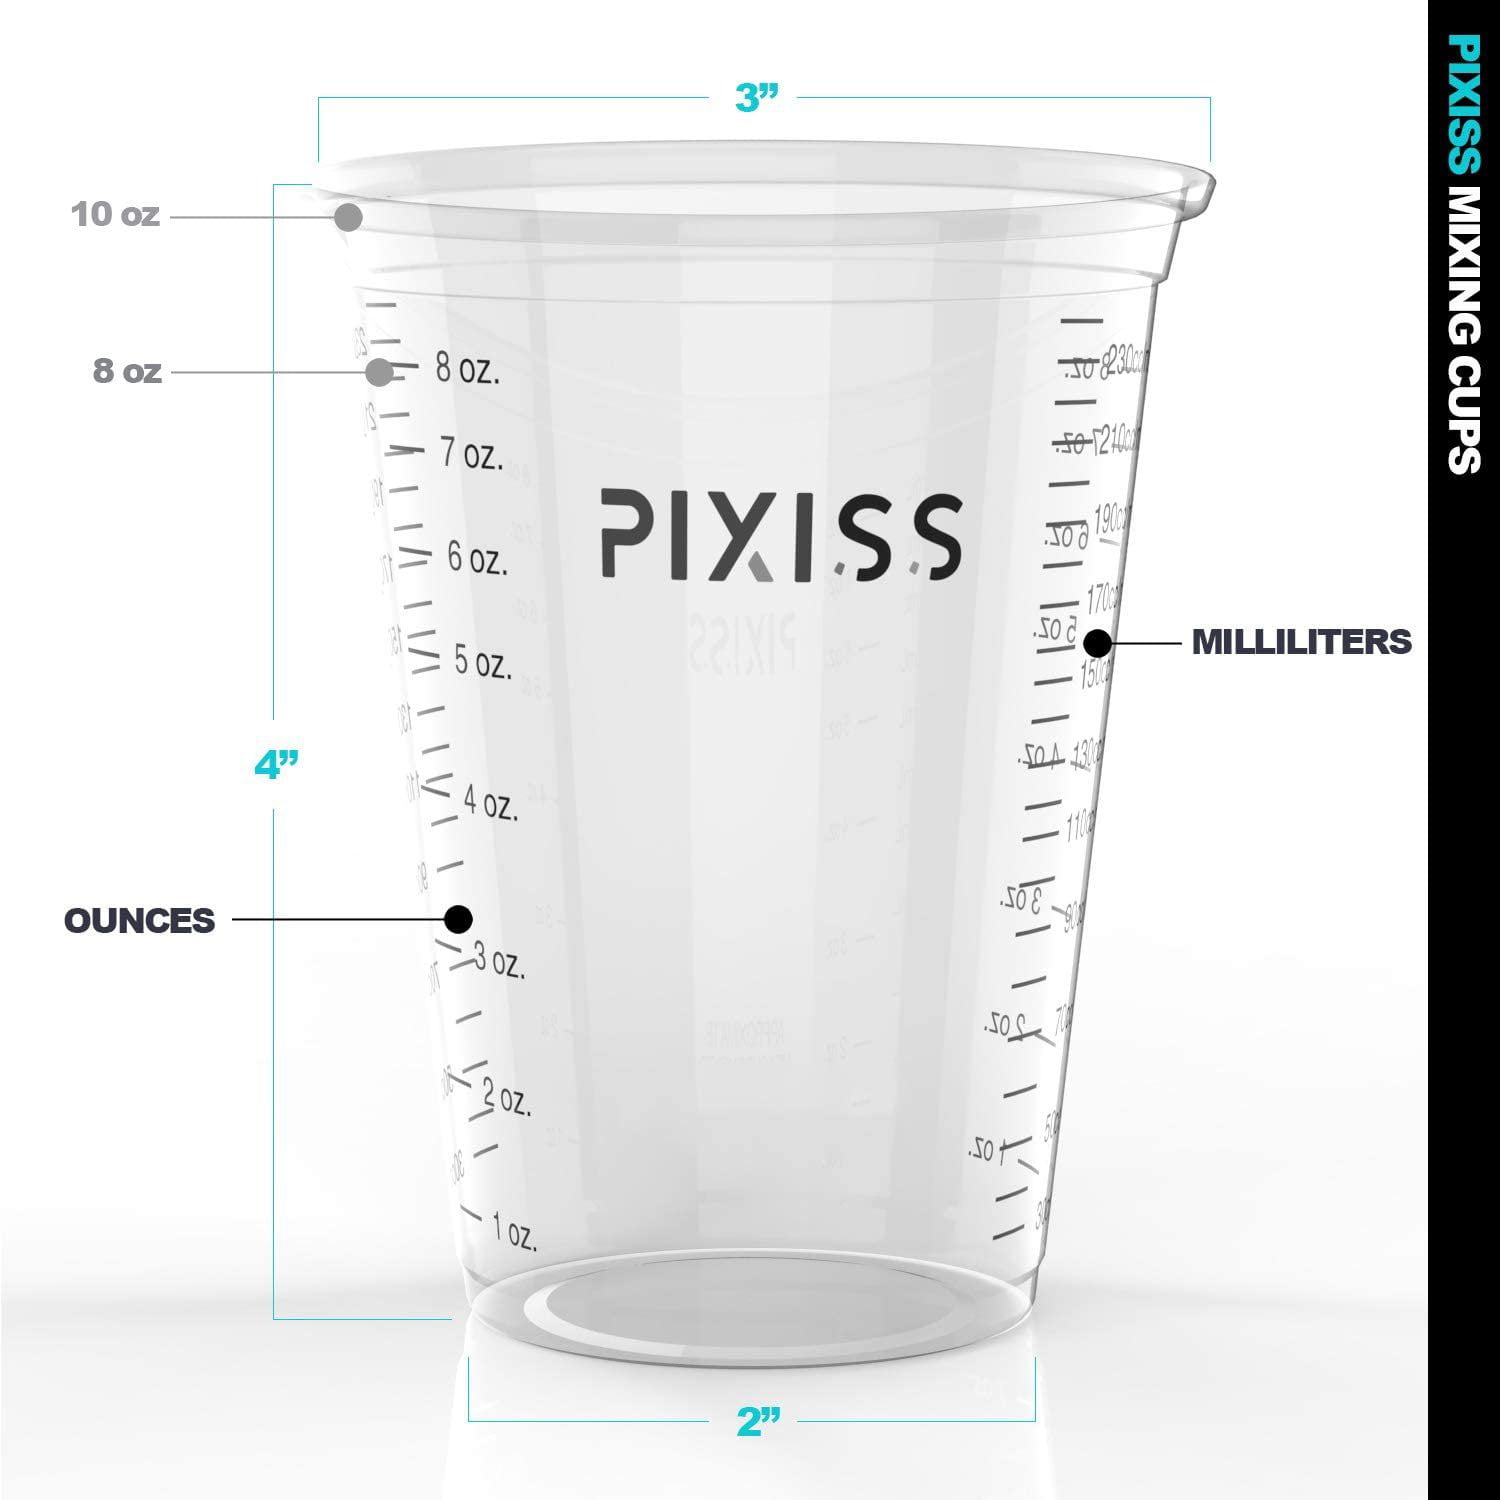 QIFEI Disposable Epoxy Resin Mixing Cups Clear Plastic 50ml 10pcs For  Measuring Paint Epoxy Resin Art Supplies - Graduated Measurements in ML -  Multipurpose Mixing Cups for Cooking and Baking 